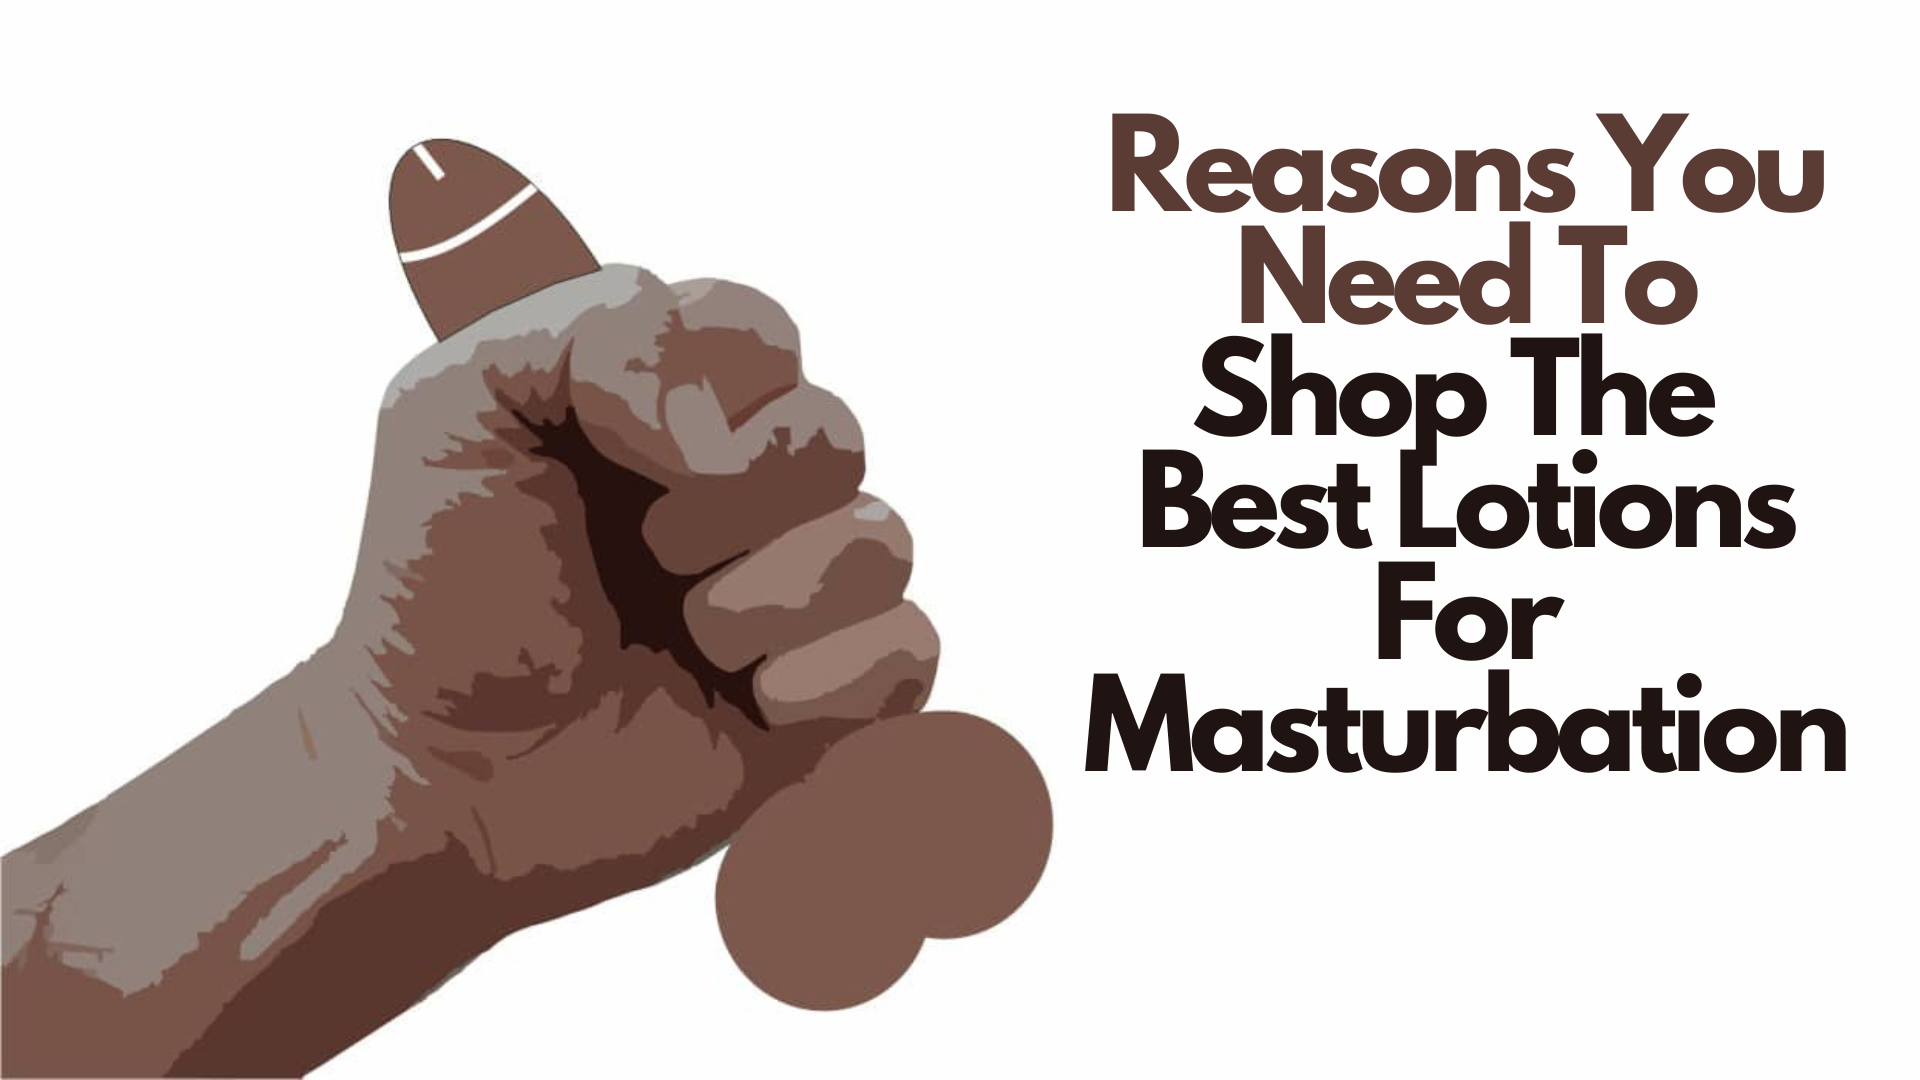 A person holding a dick with words Reasons You Need To Shop The Best Lotions For Masturbation